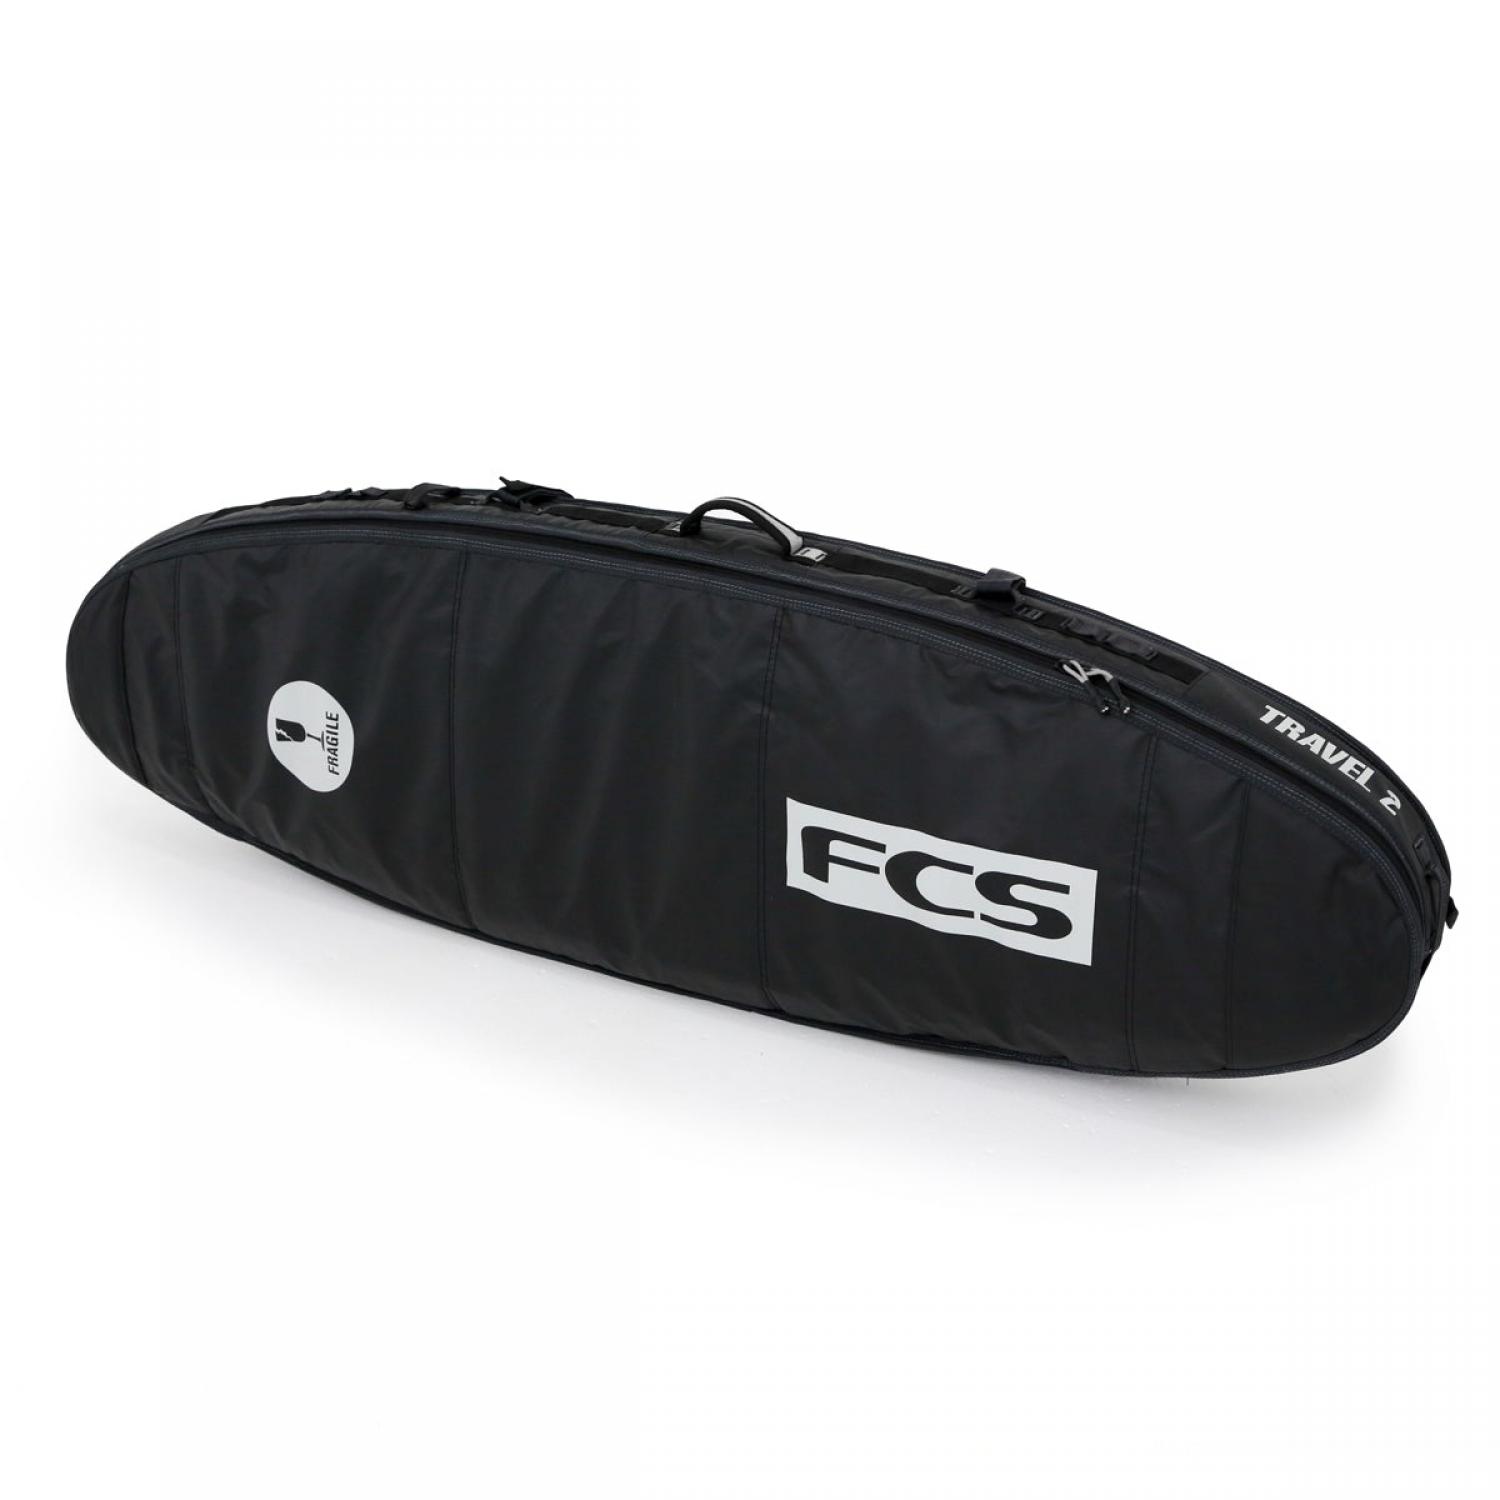 7.0 FCS TRAVEL 2 FUNBOARD SURFBOARD COVER